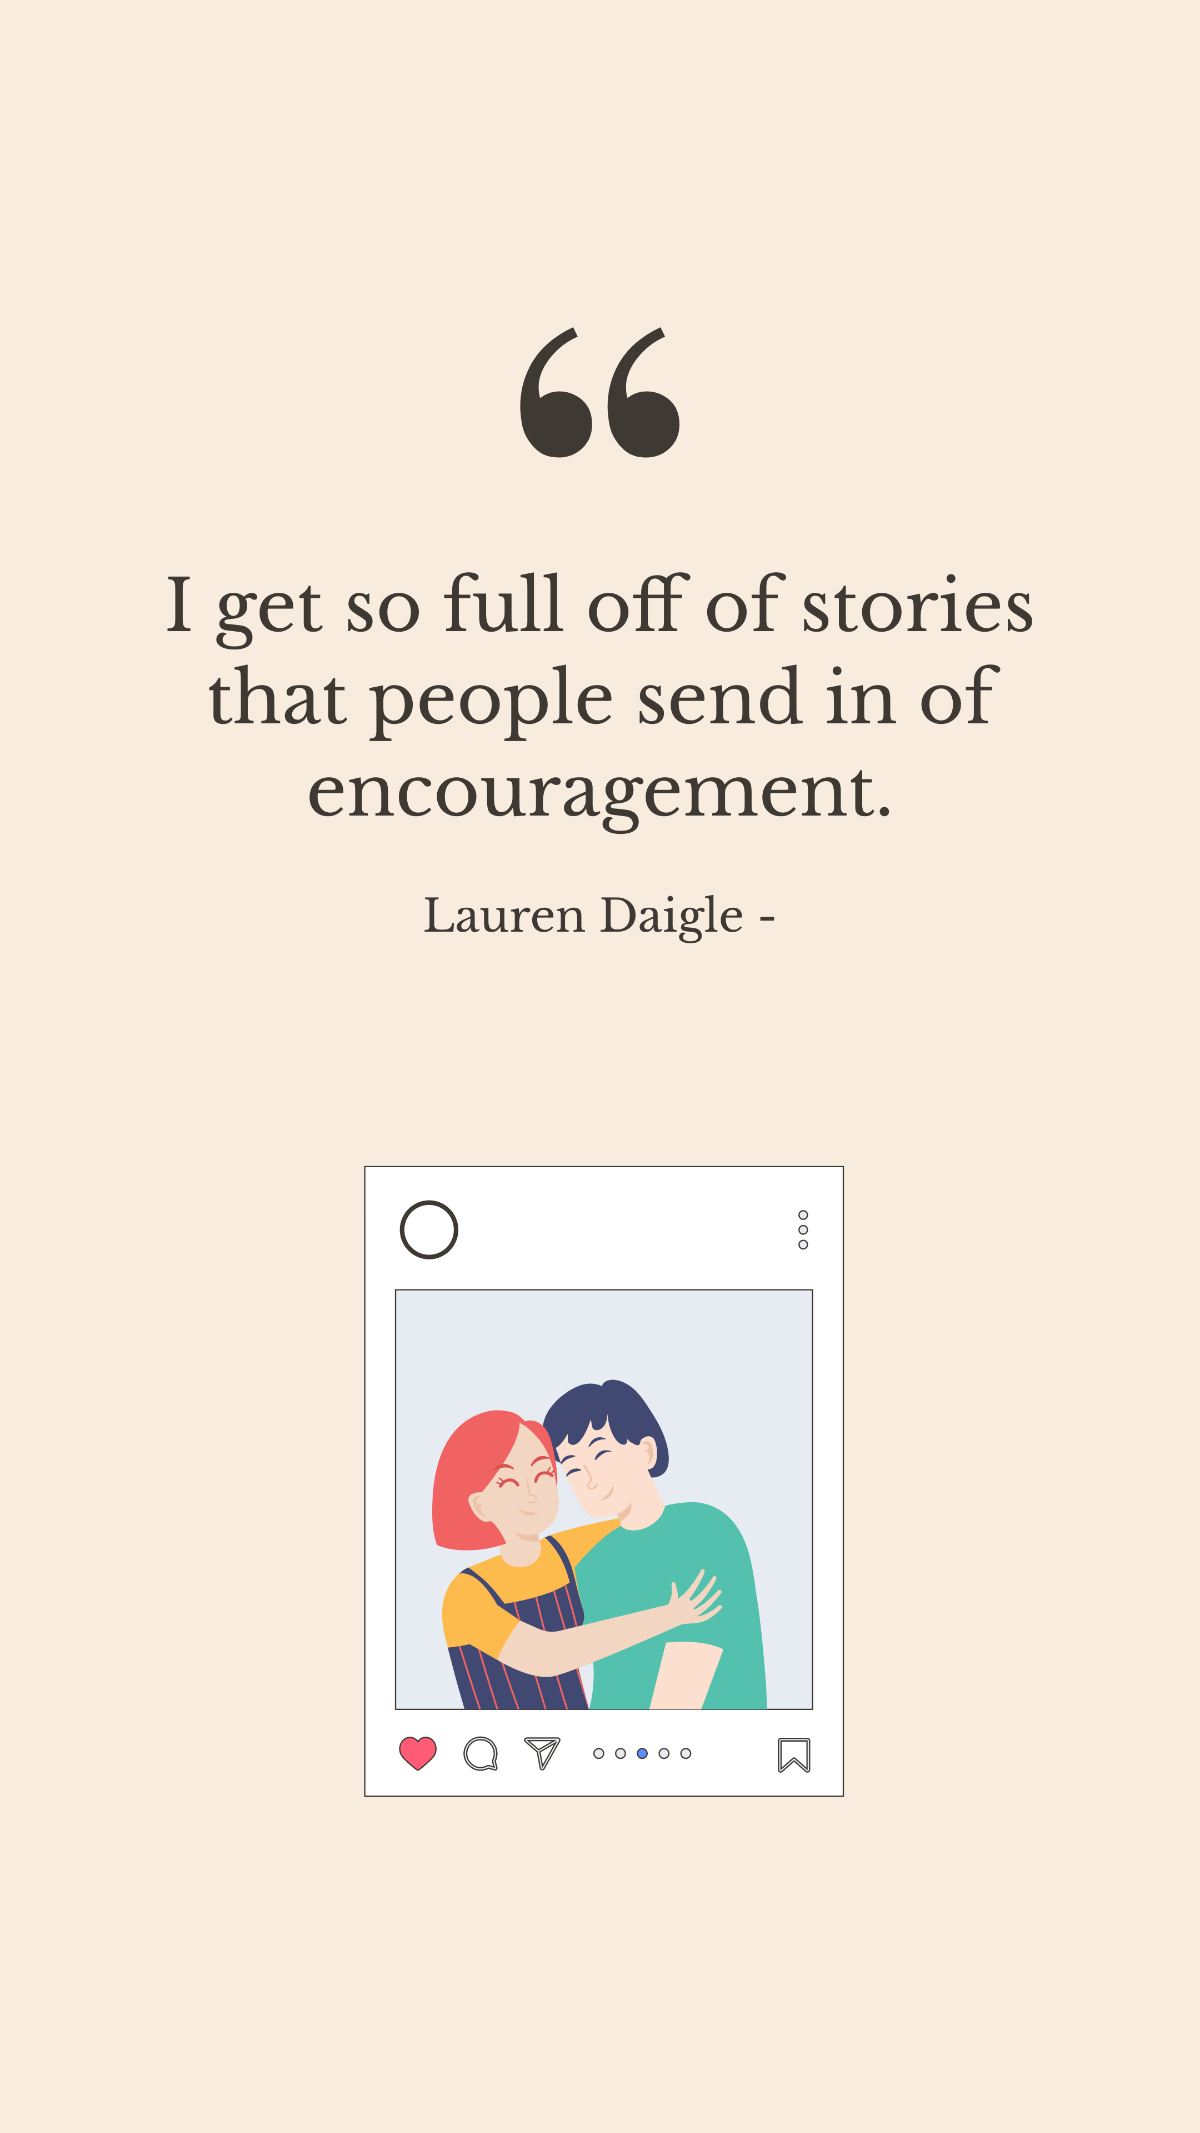 Free Lauren Daigle - I get so full off of stories that people send in of encouragement. Template